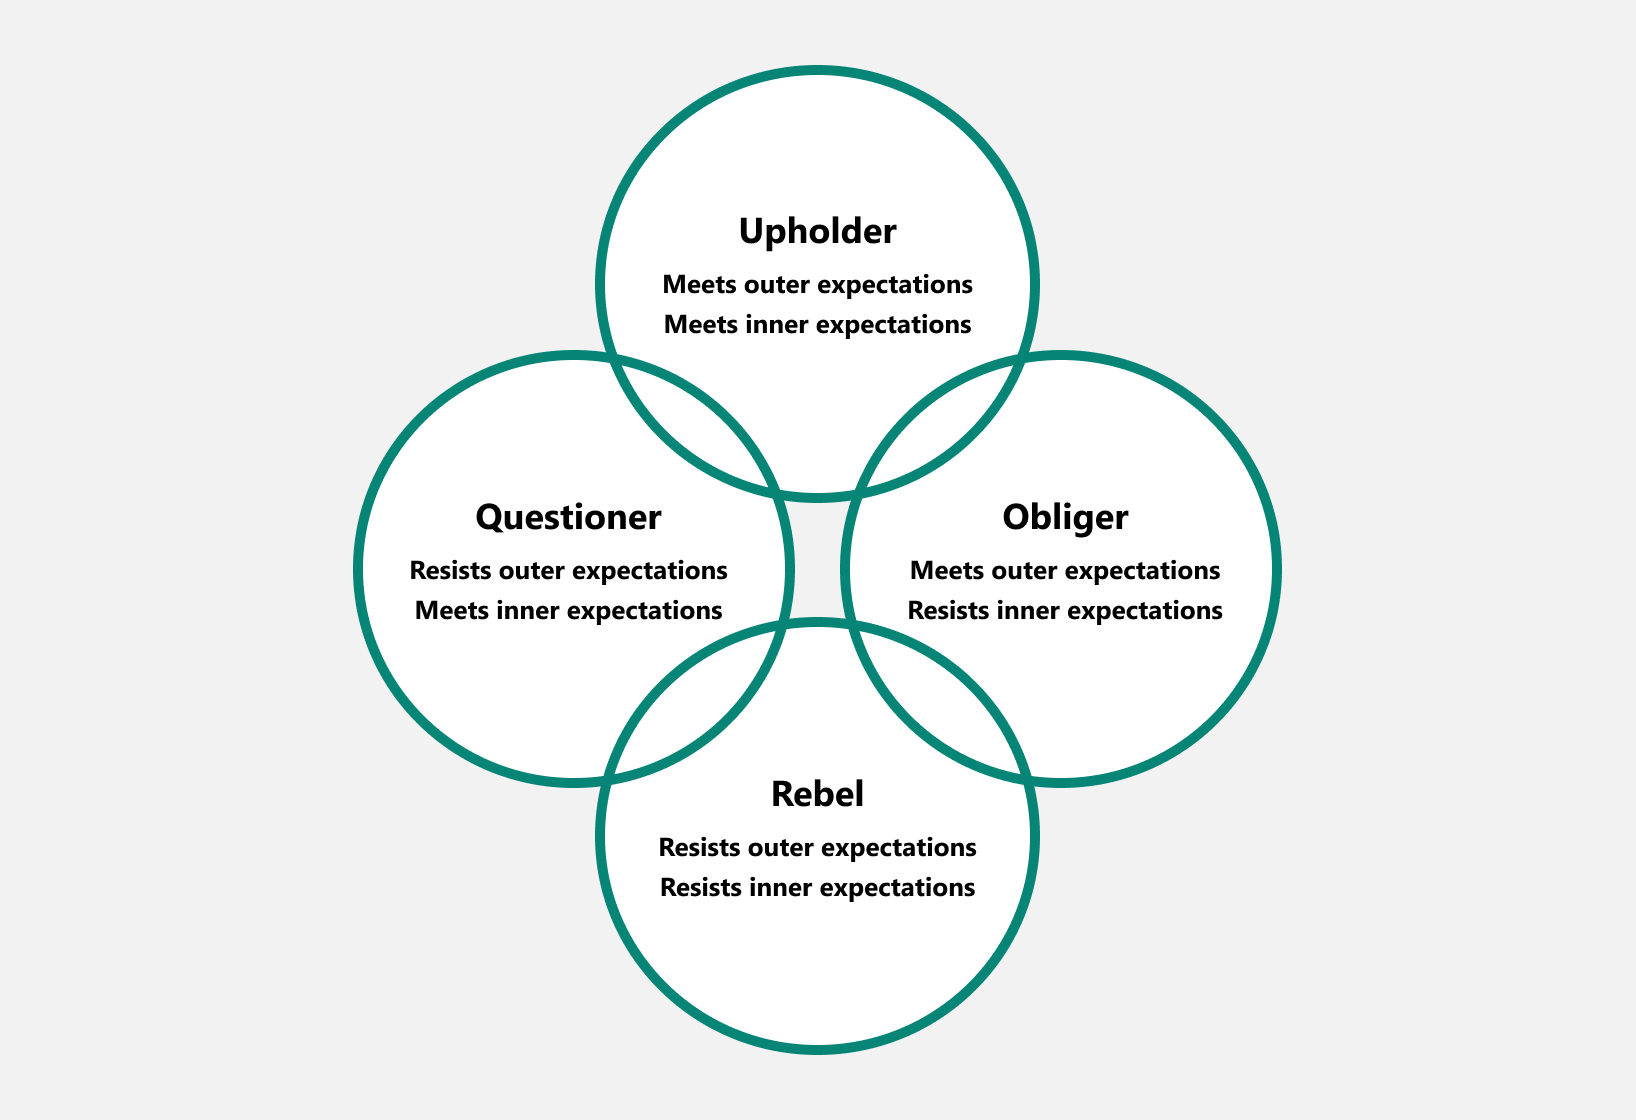 Diagram of the four personality tendencies: Questioner, Upholder, Obliger, Rebel.